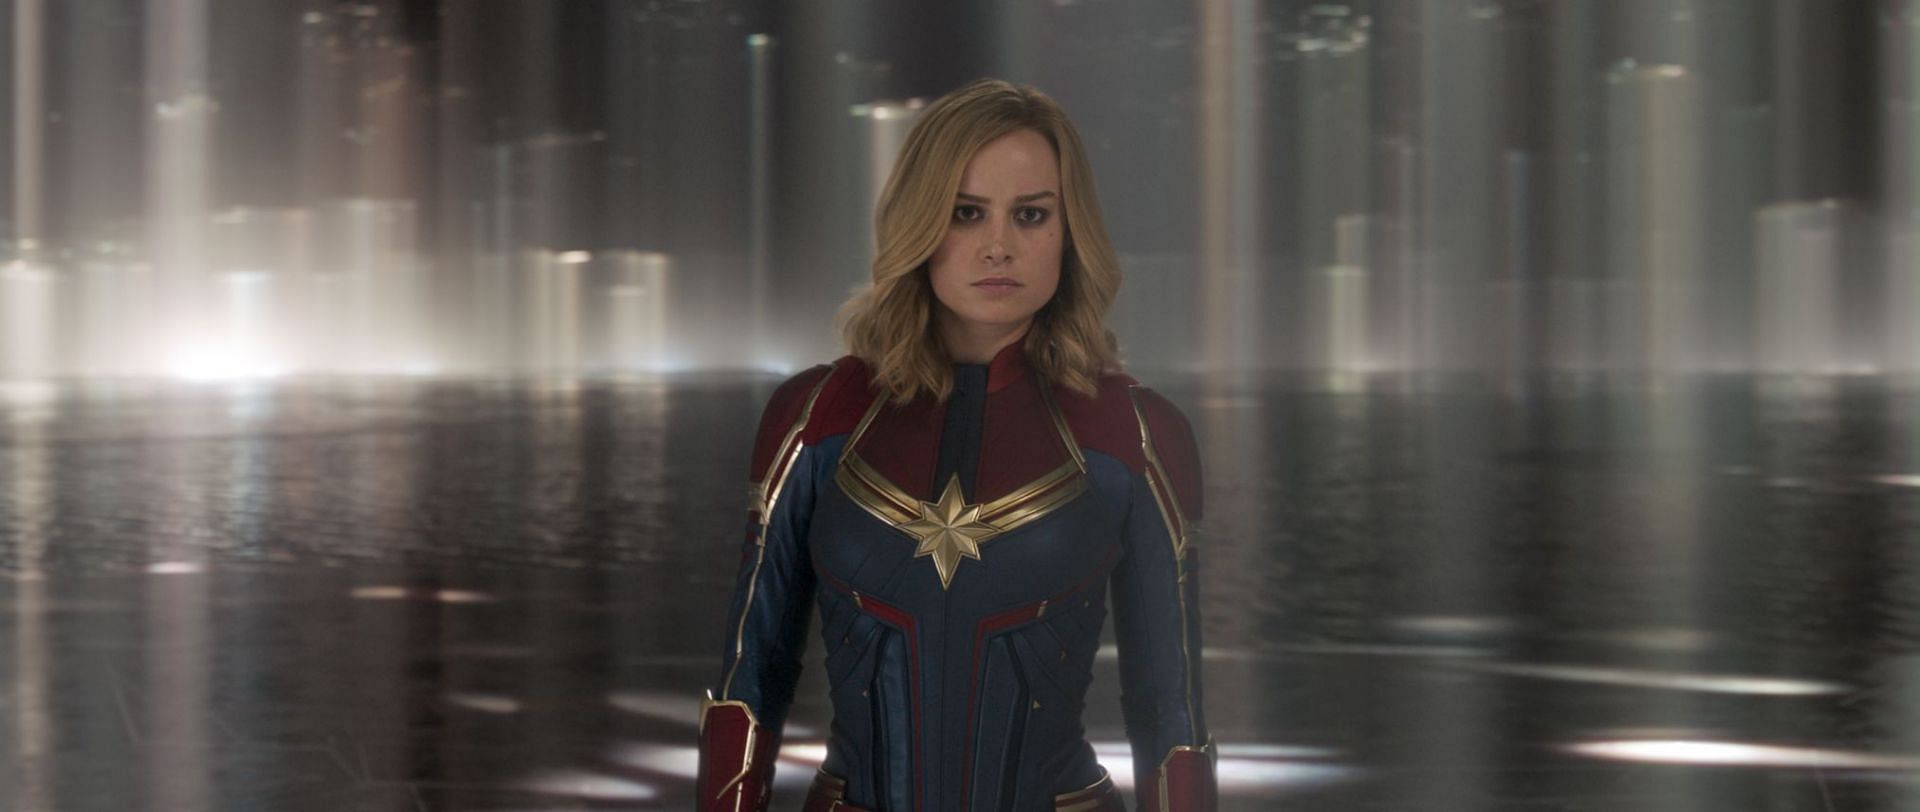 Brie Larson portrays the titular character in this movie, which received backlash for perceived attacks on male audiences (Image via Marvel Studios)